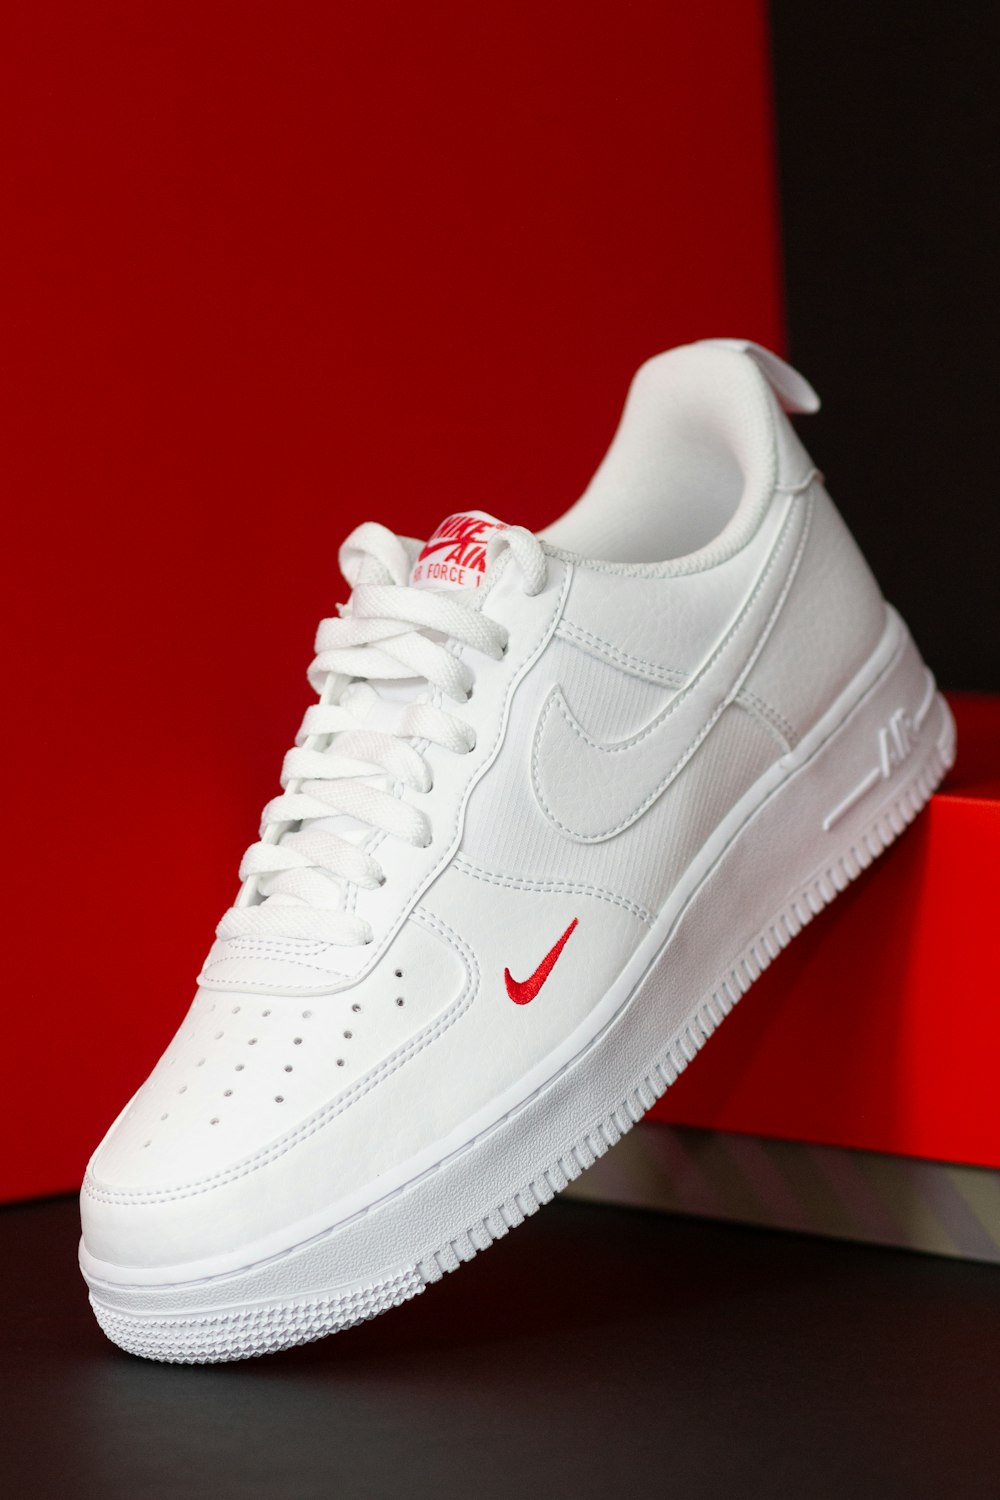 a pair of white nike air force sneakers